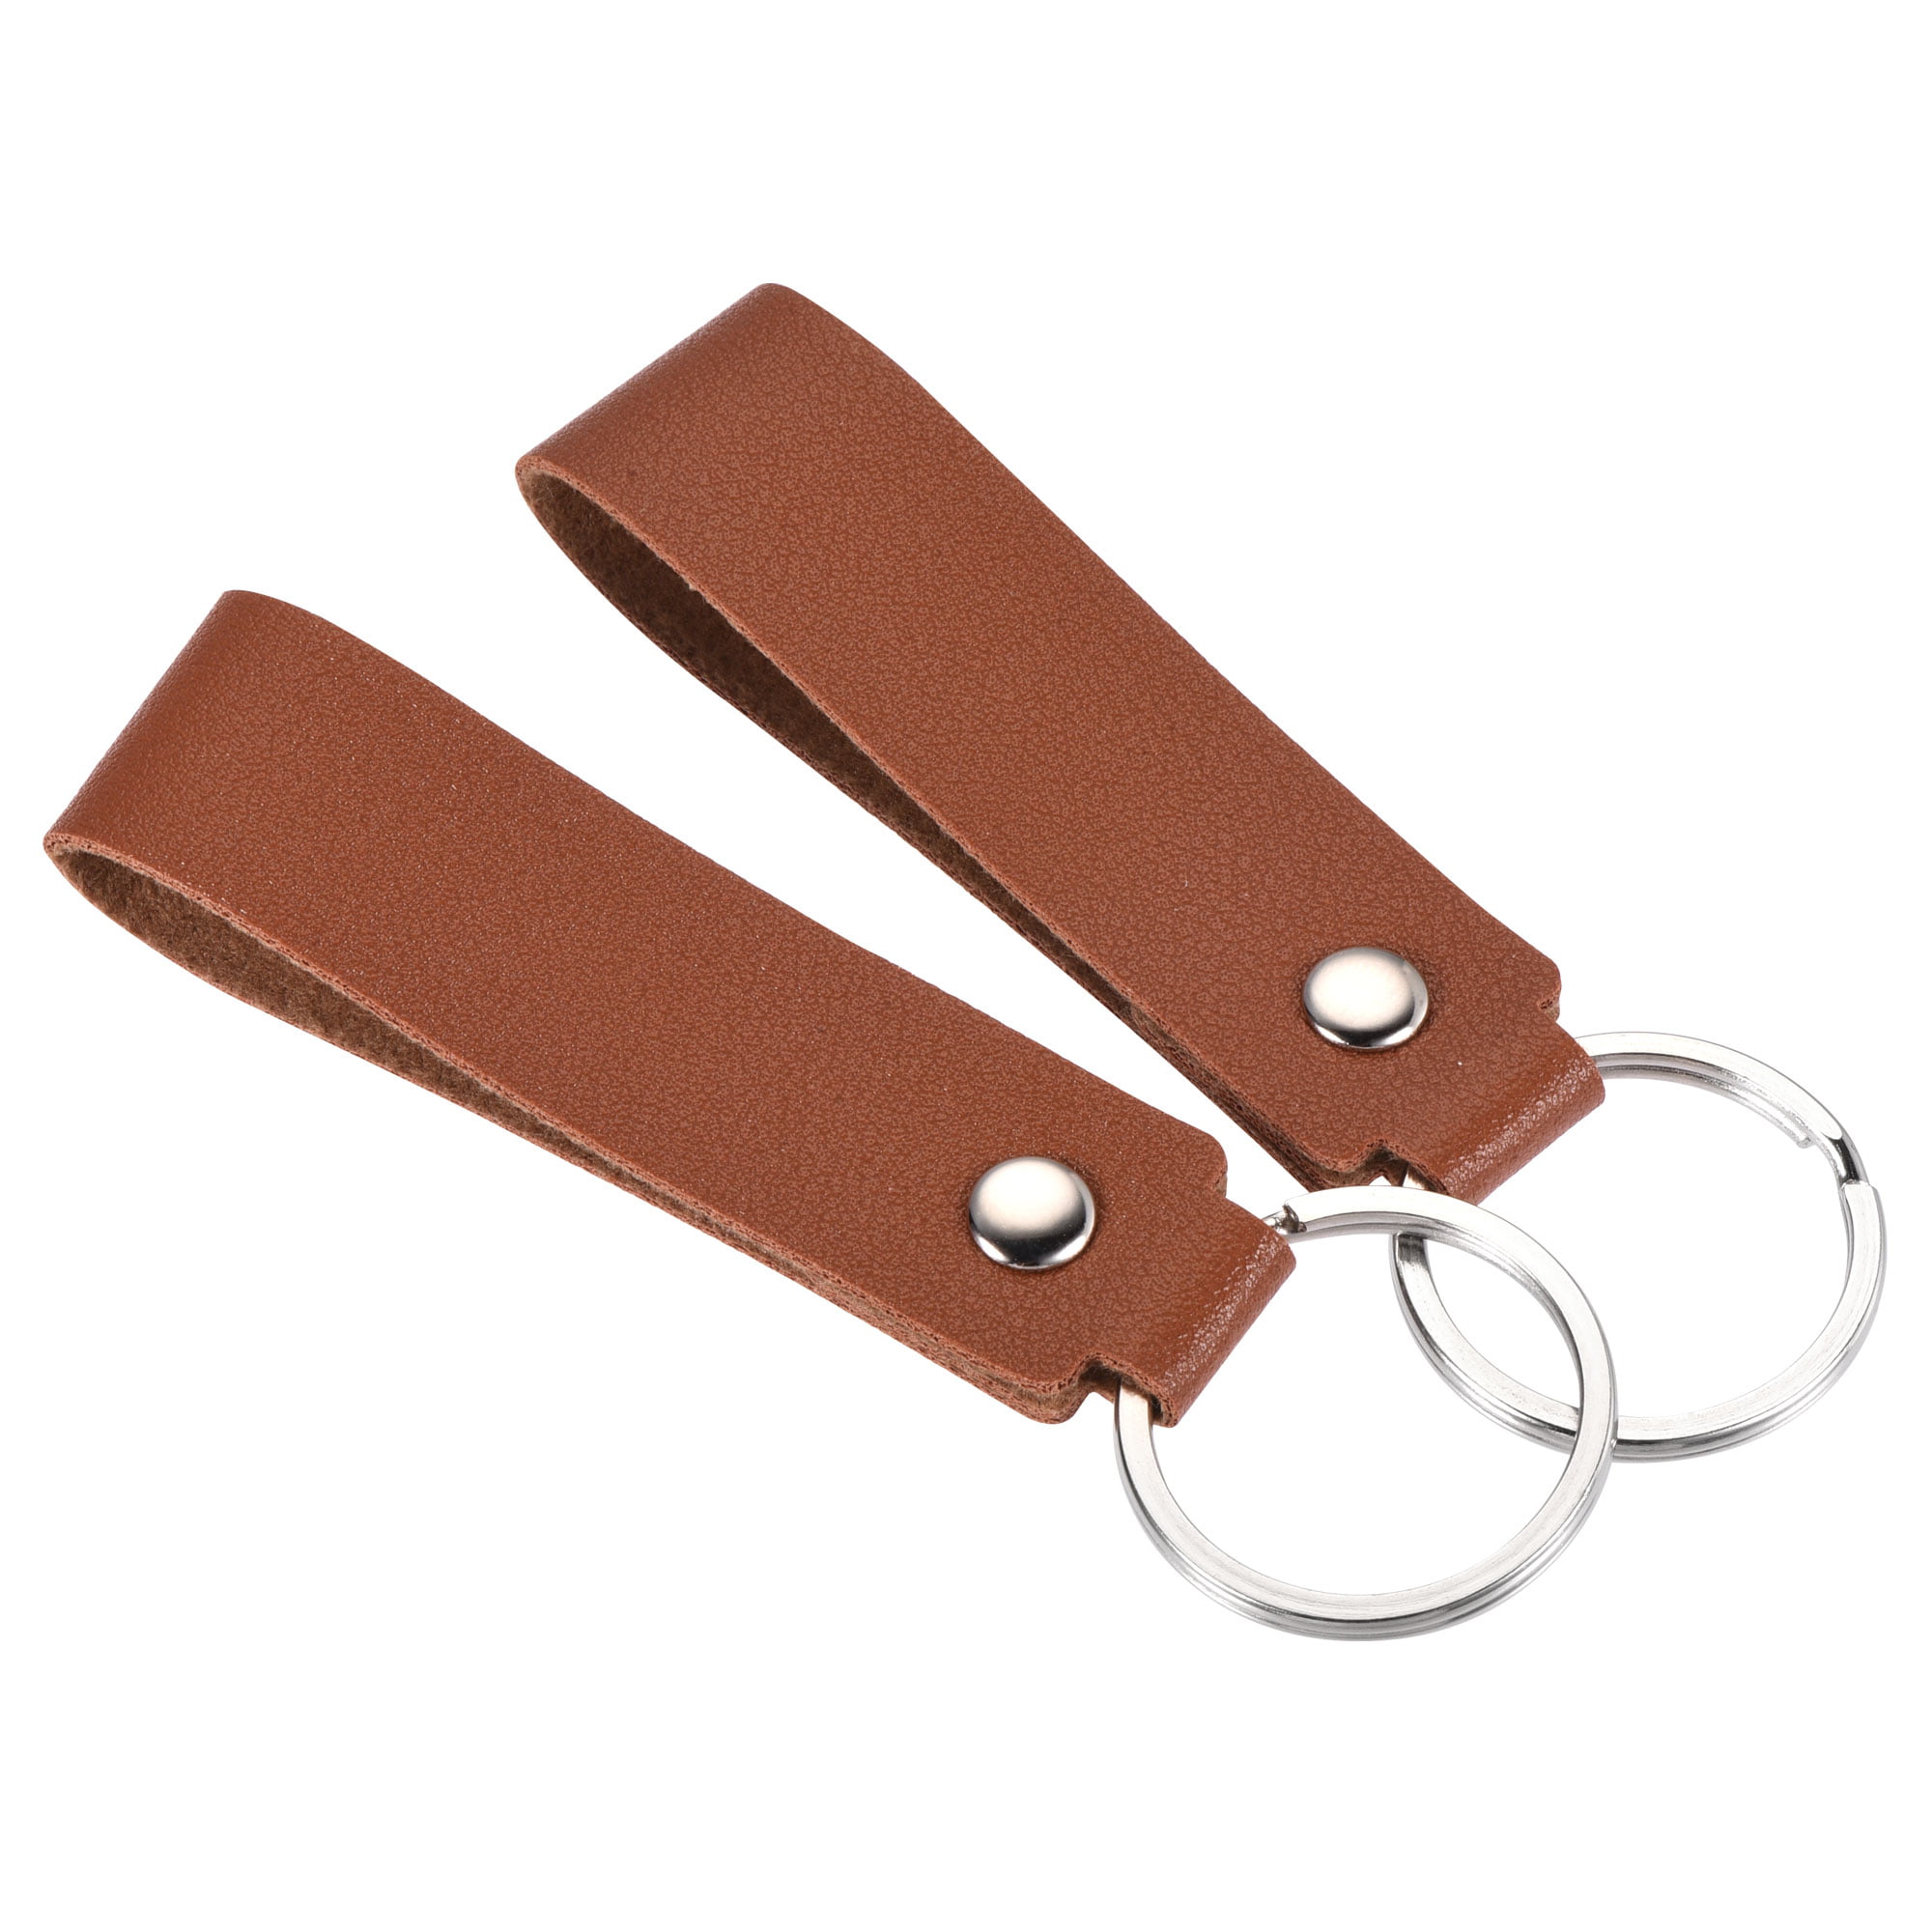 Keychain – Clip Short in Perforated Leather (Assorted Colors) by